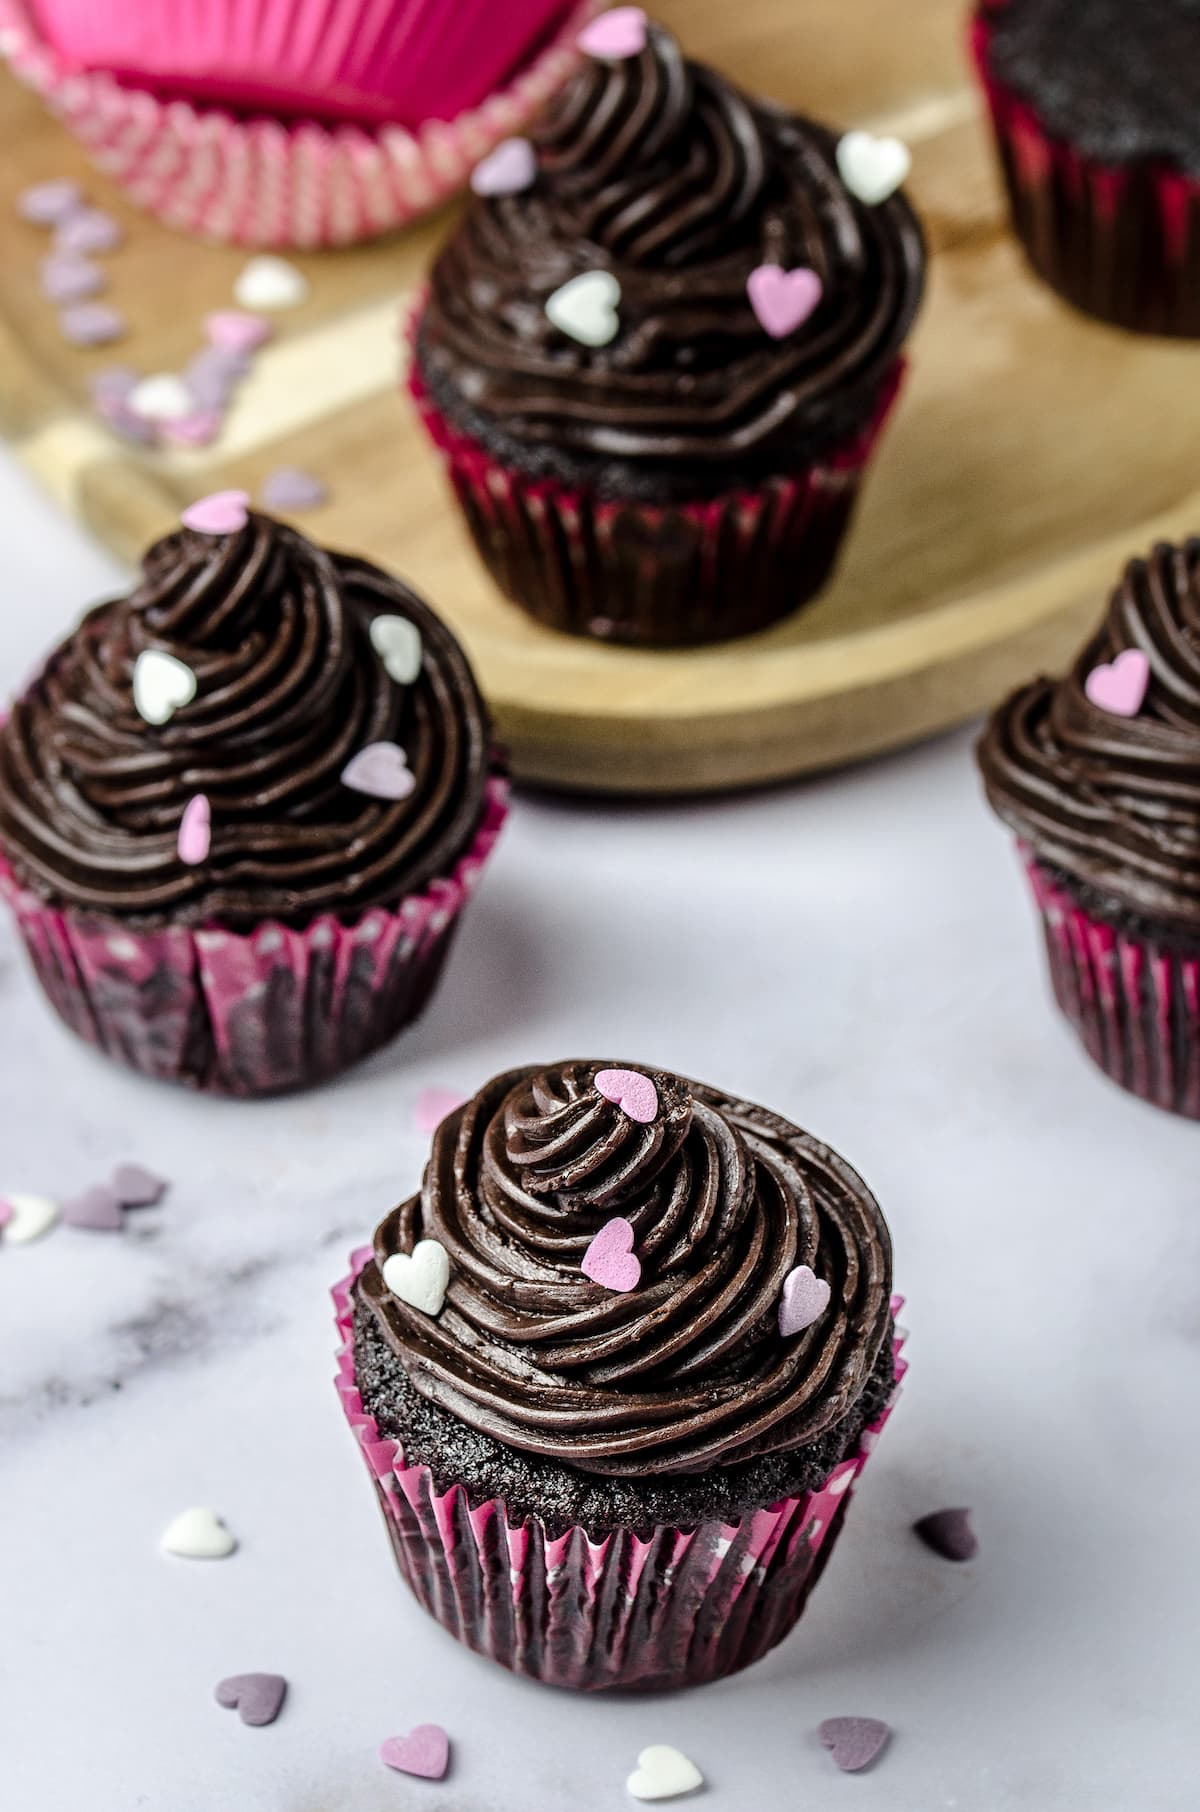 Chocolate cupcakes frosted with a rich and decadent chocolate fudge buttercream frosting, topped with sprinkles.